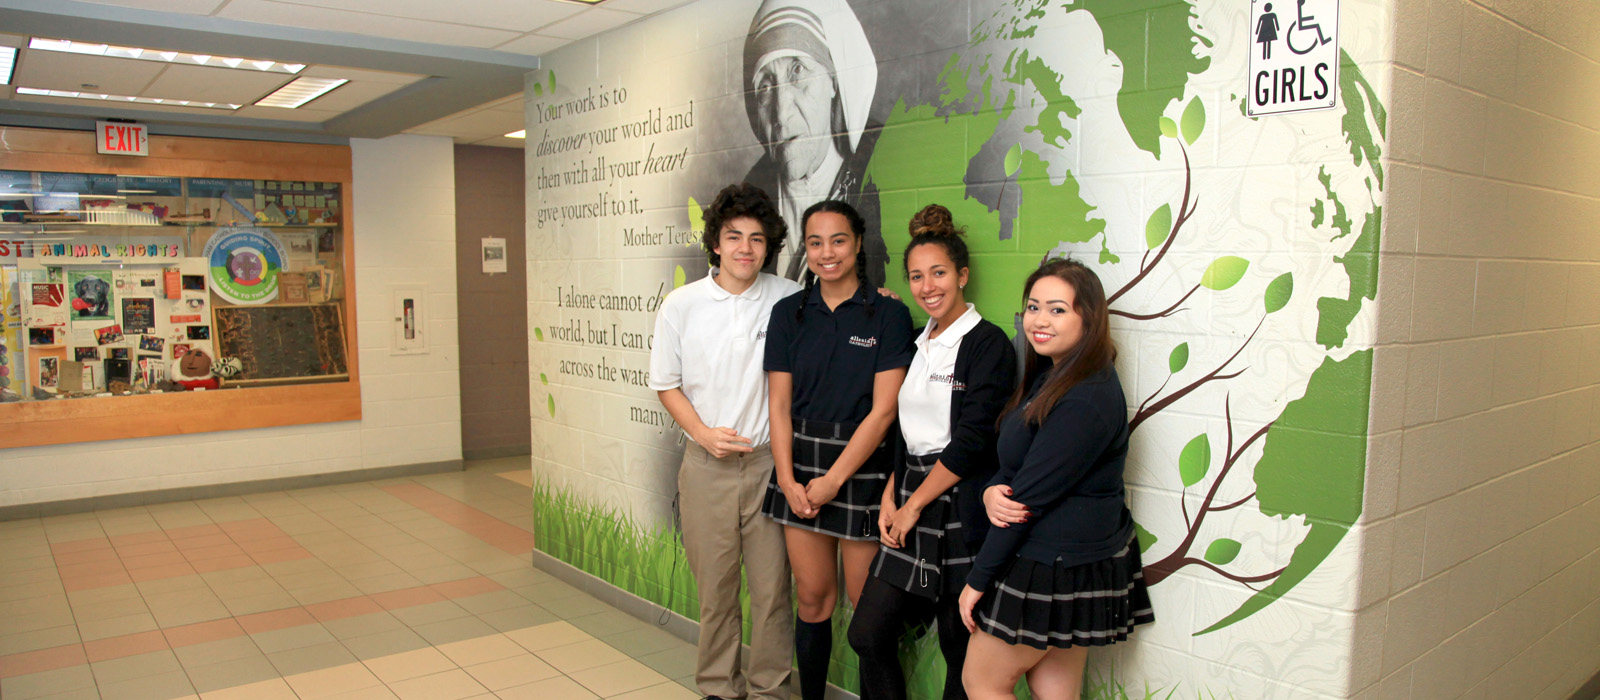 Four students standing in front of a mural depicting a quote and picture of Mother Teresa.